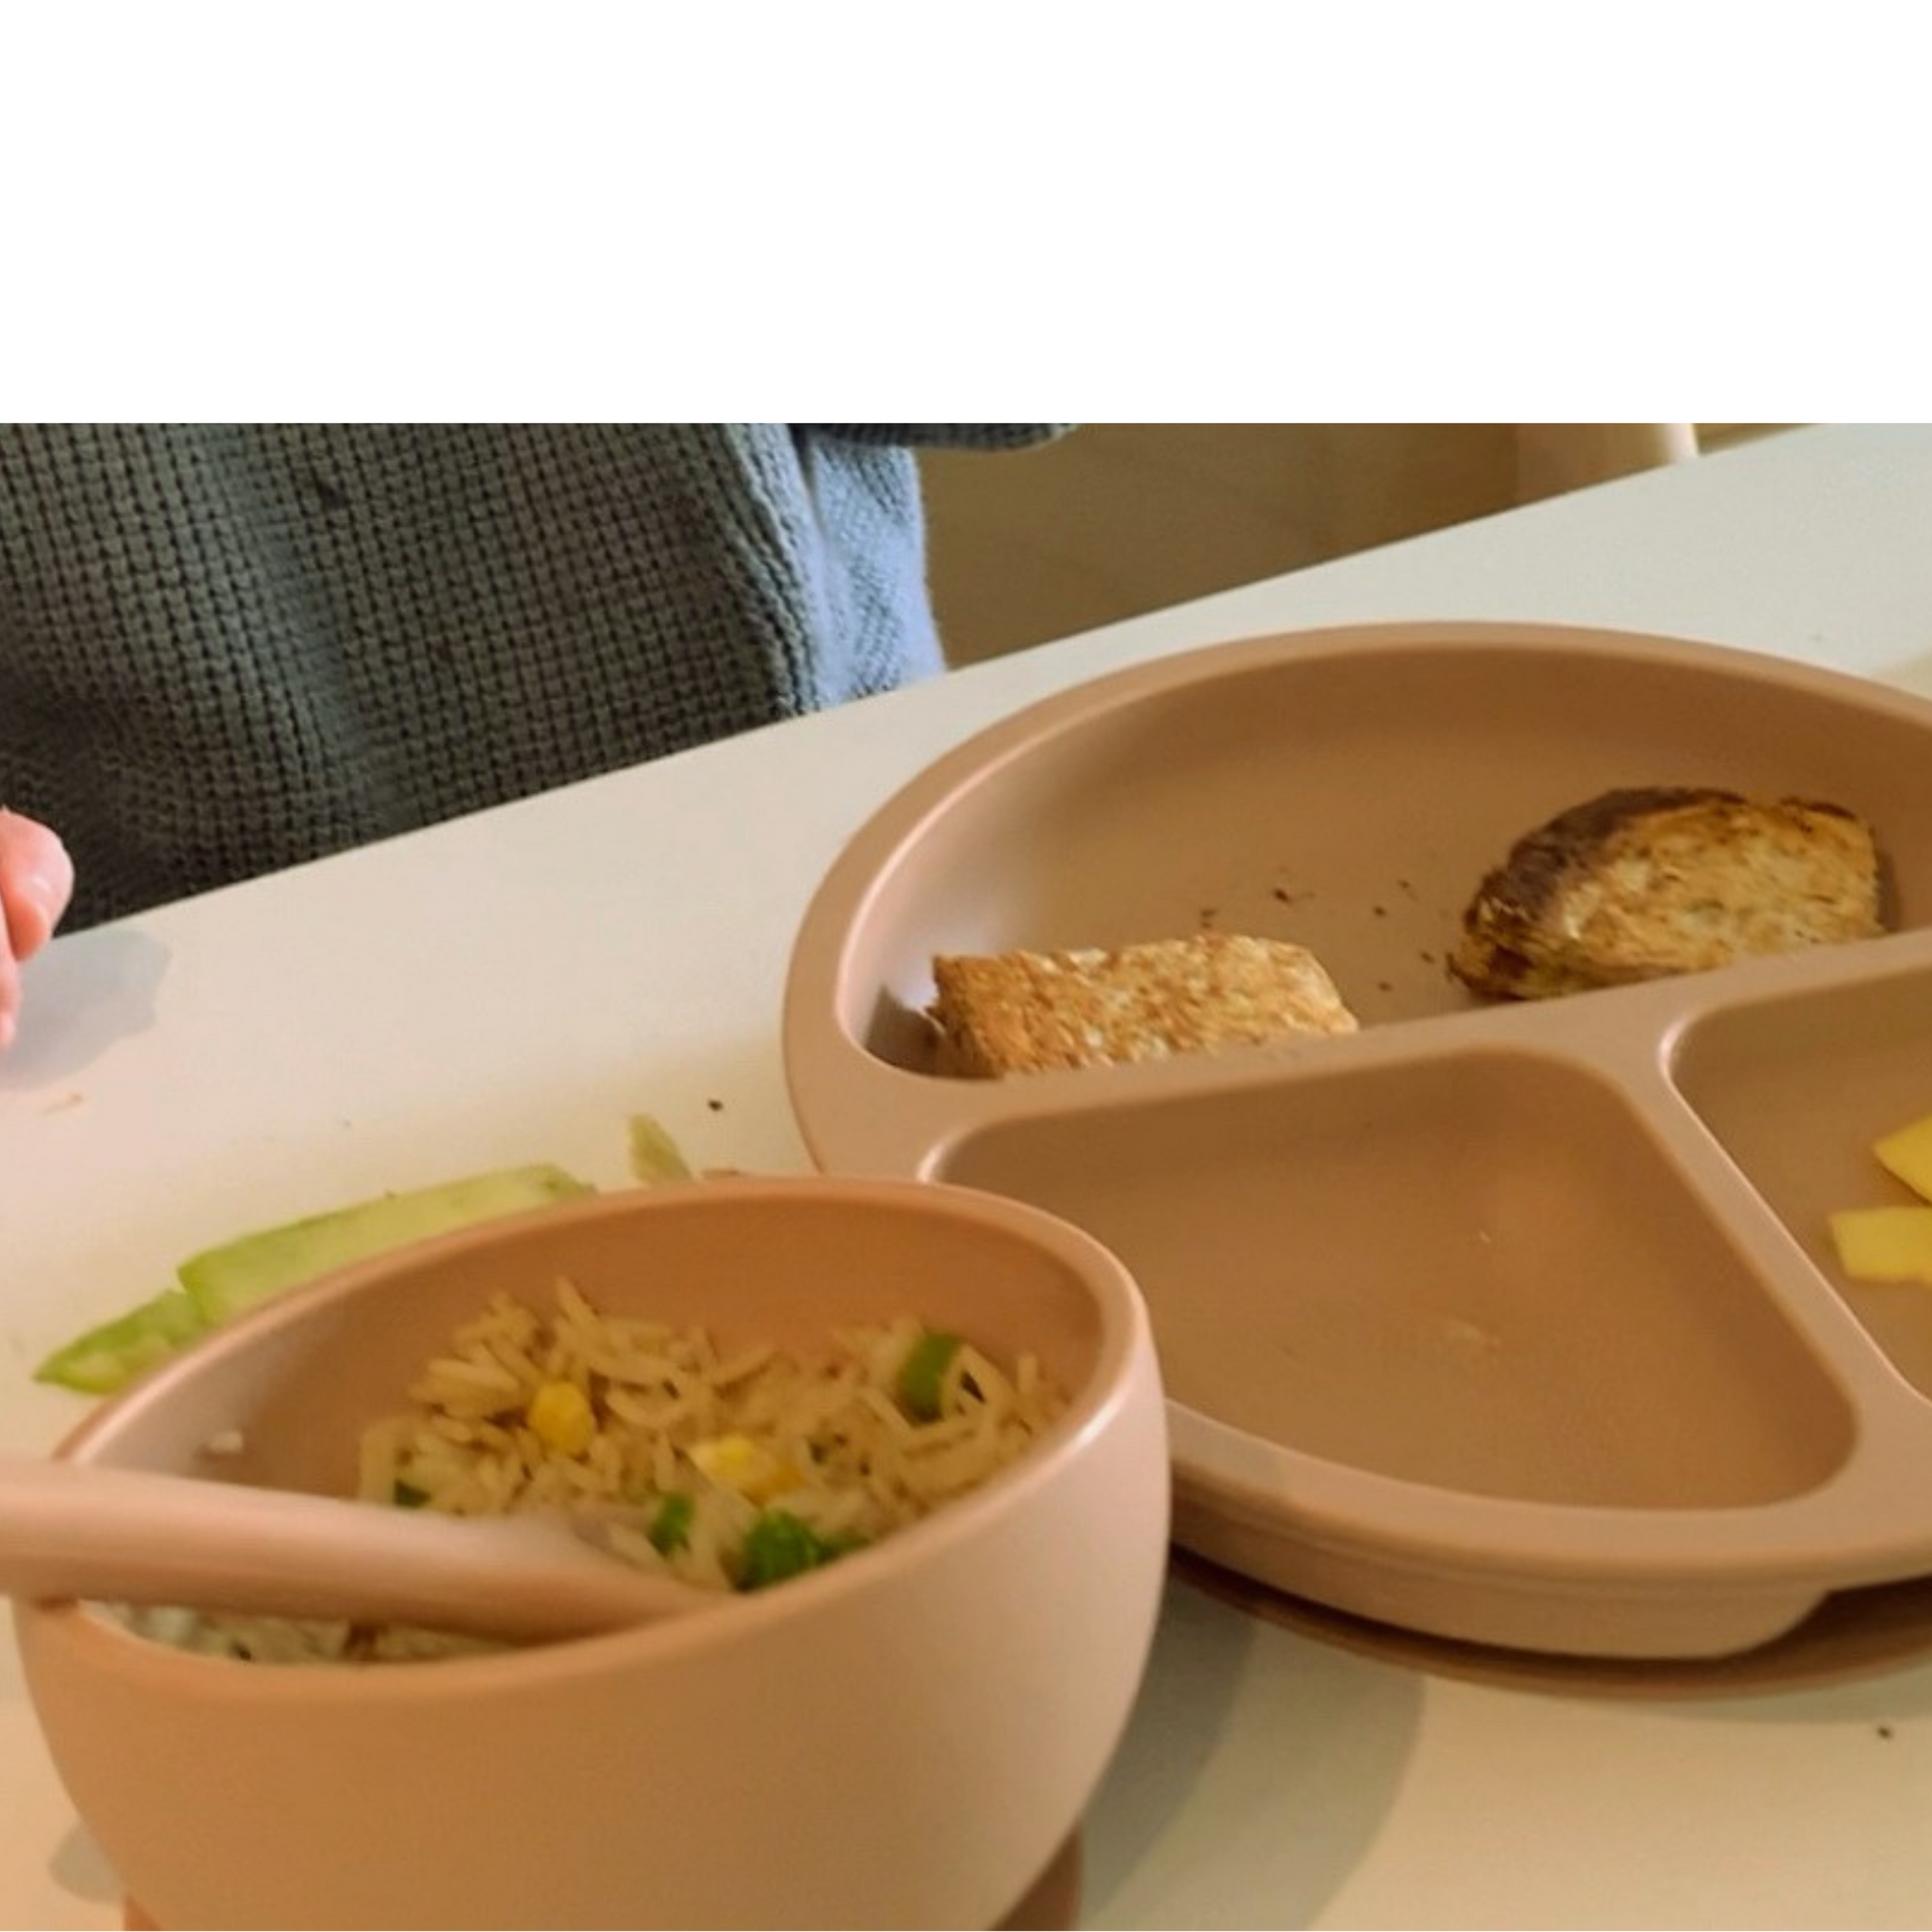 nude mealtime set . Silicone bowl, spoon and divided plate